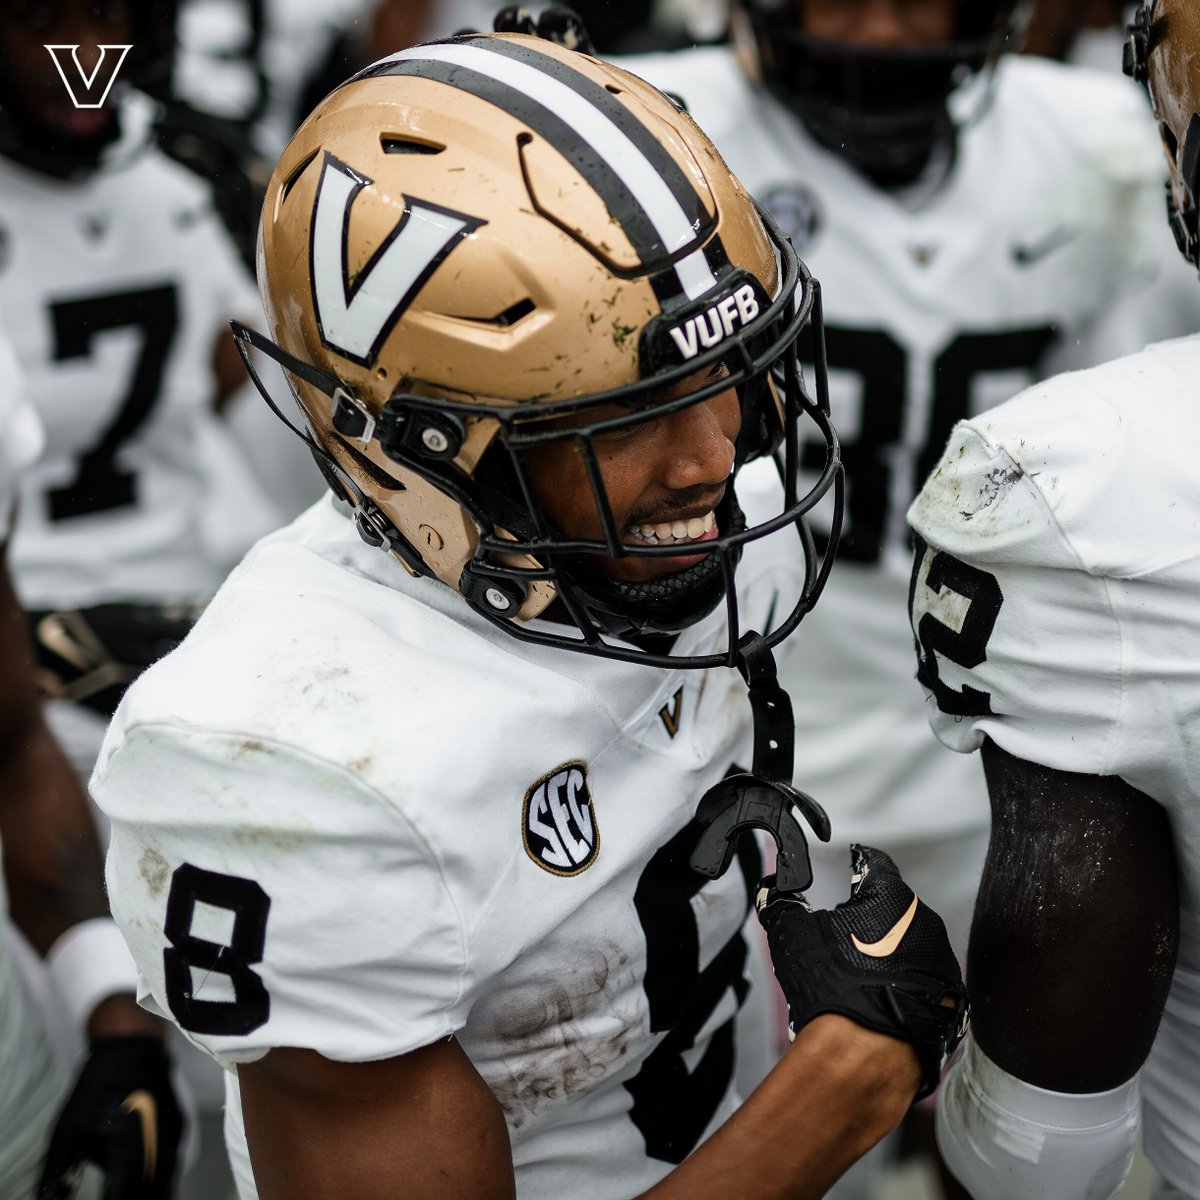 Vanderbilt has created a turnover in all 11 games this season 🧵